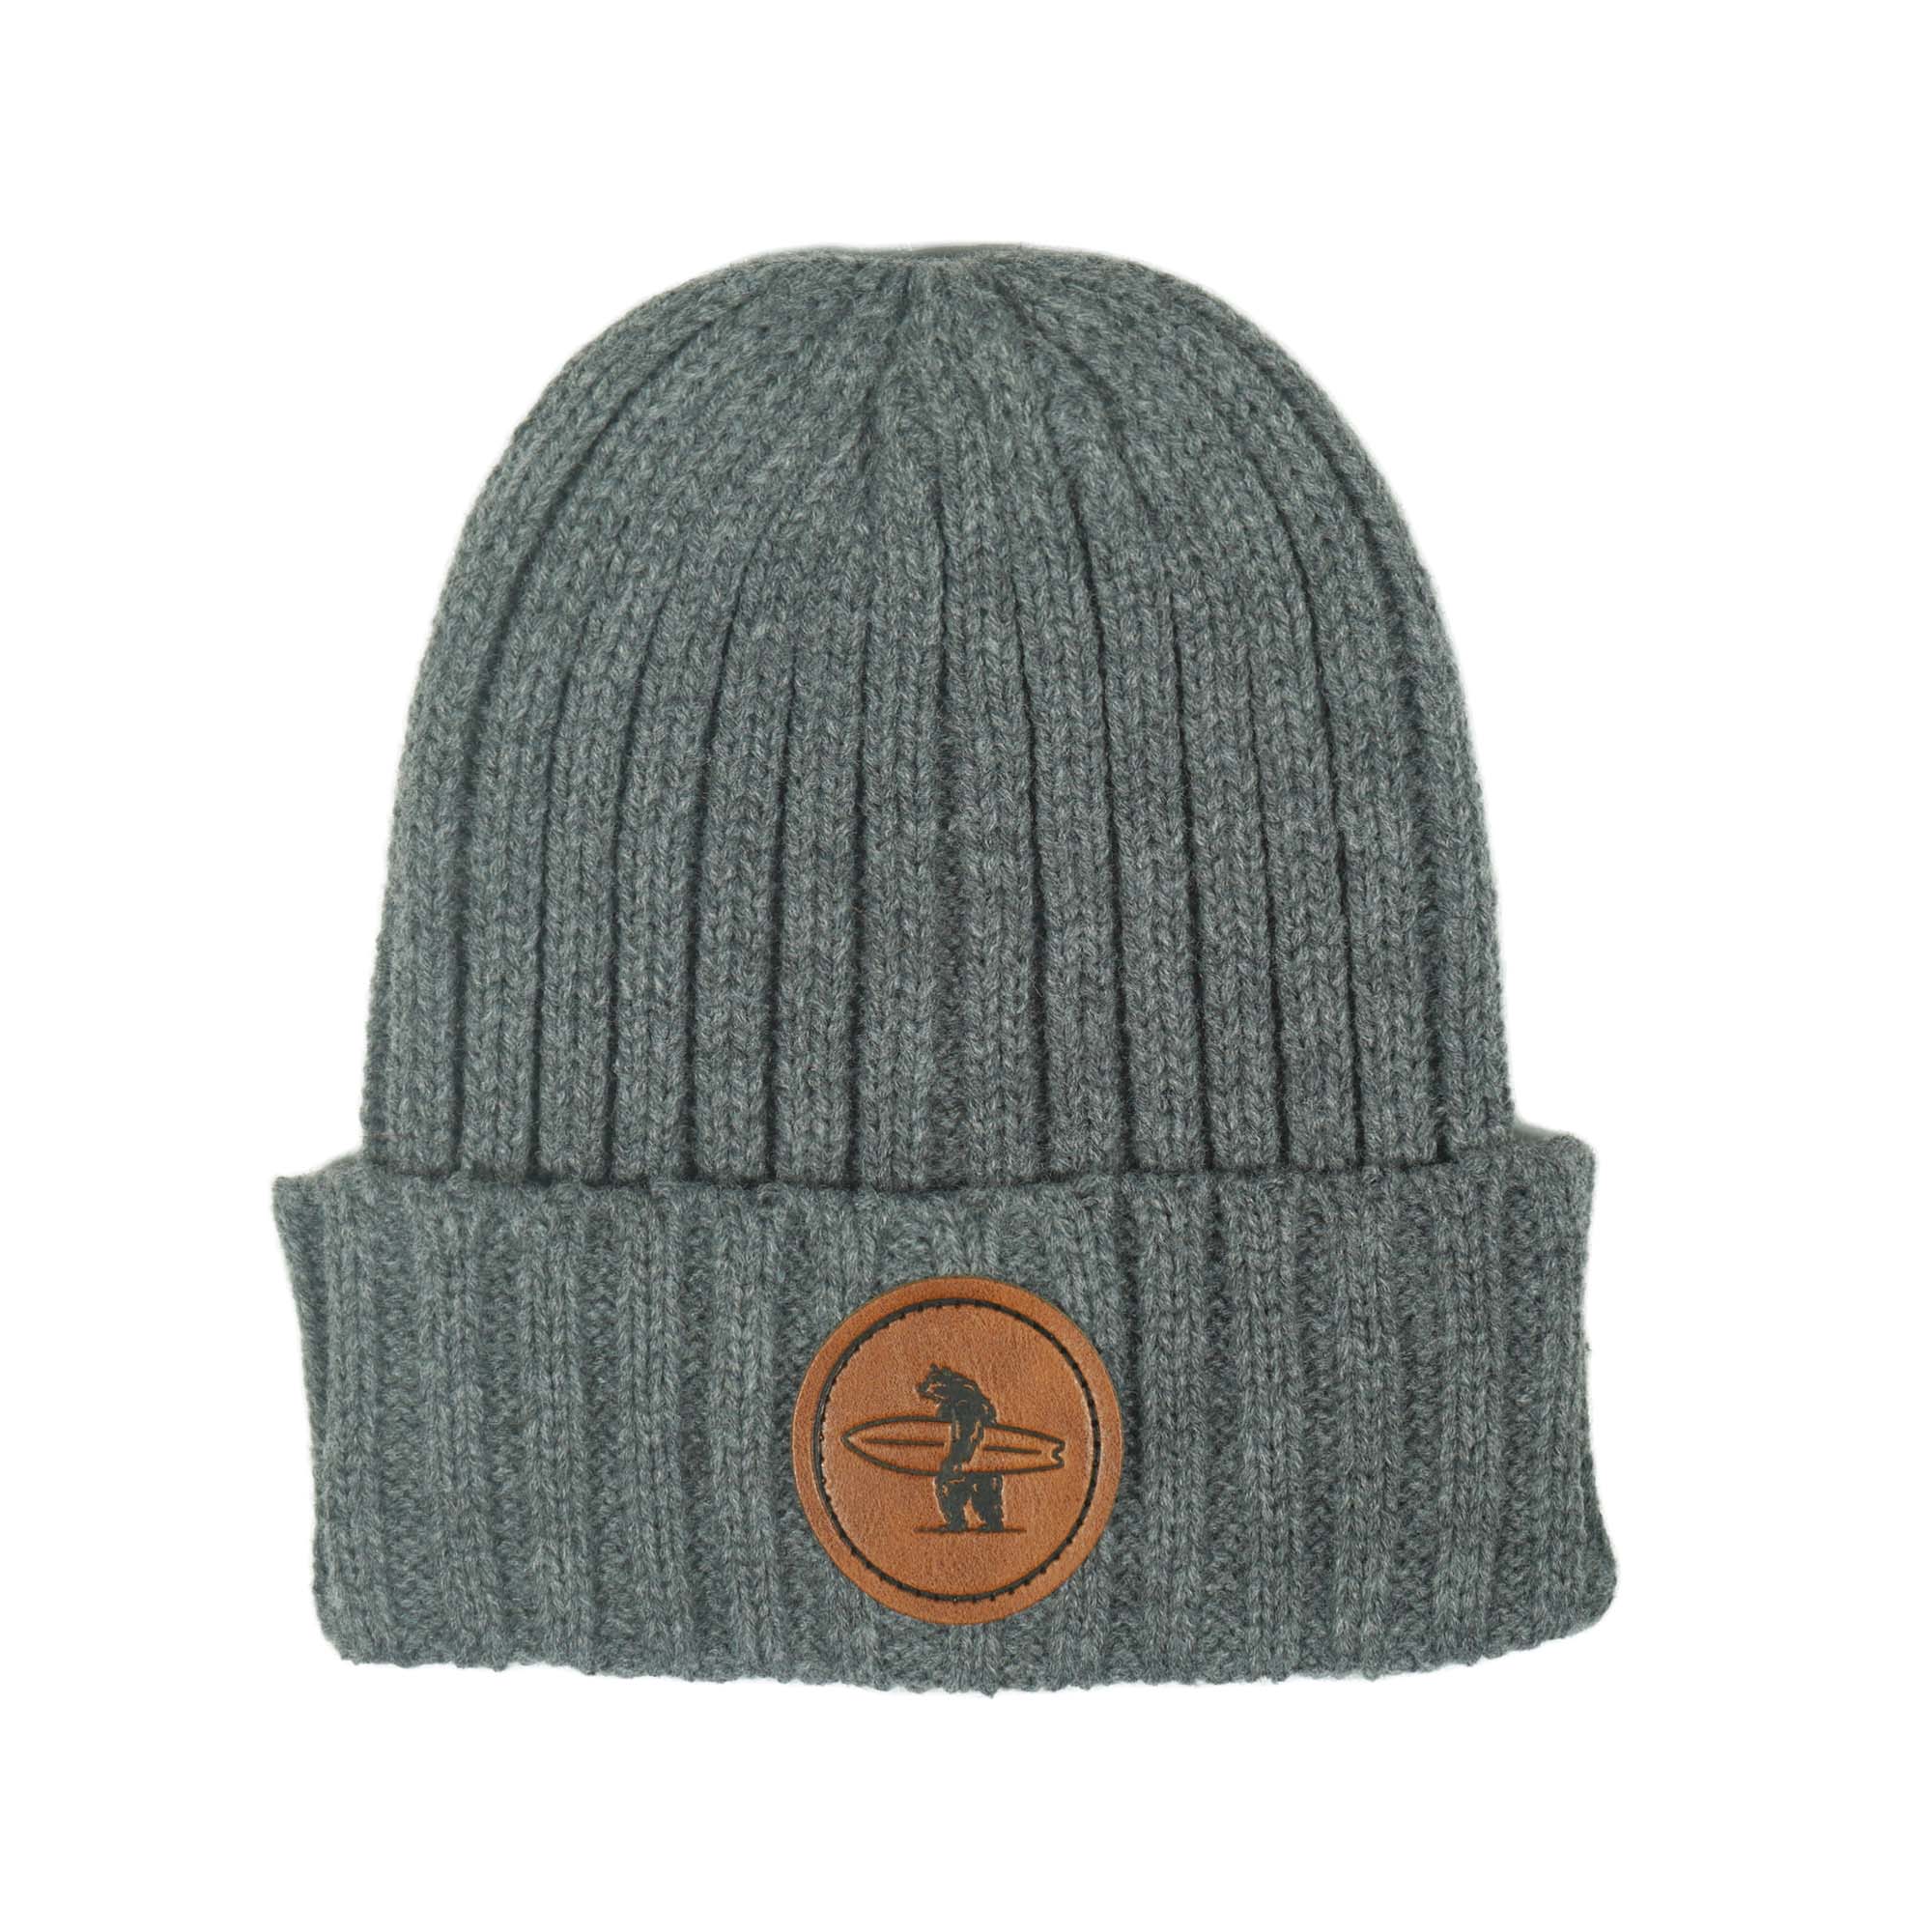 Grey Pismo Beanie by Everyday California with vegan leather patch